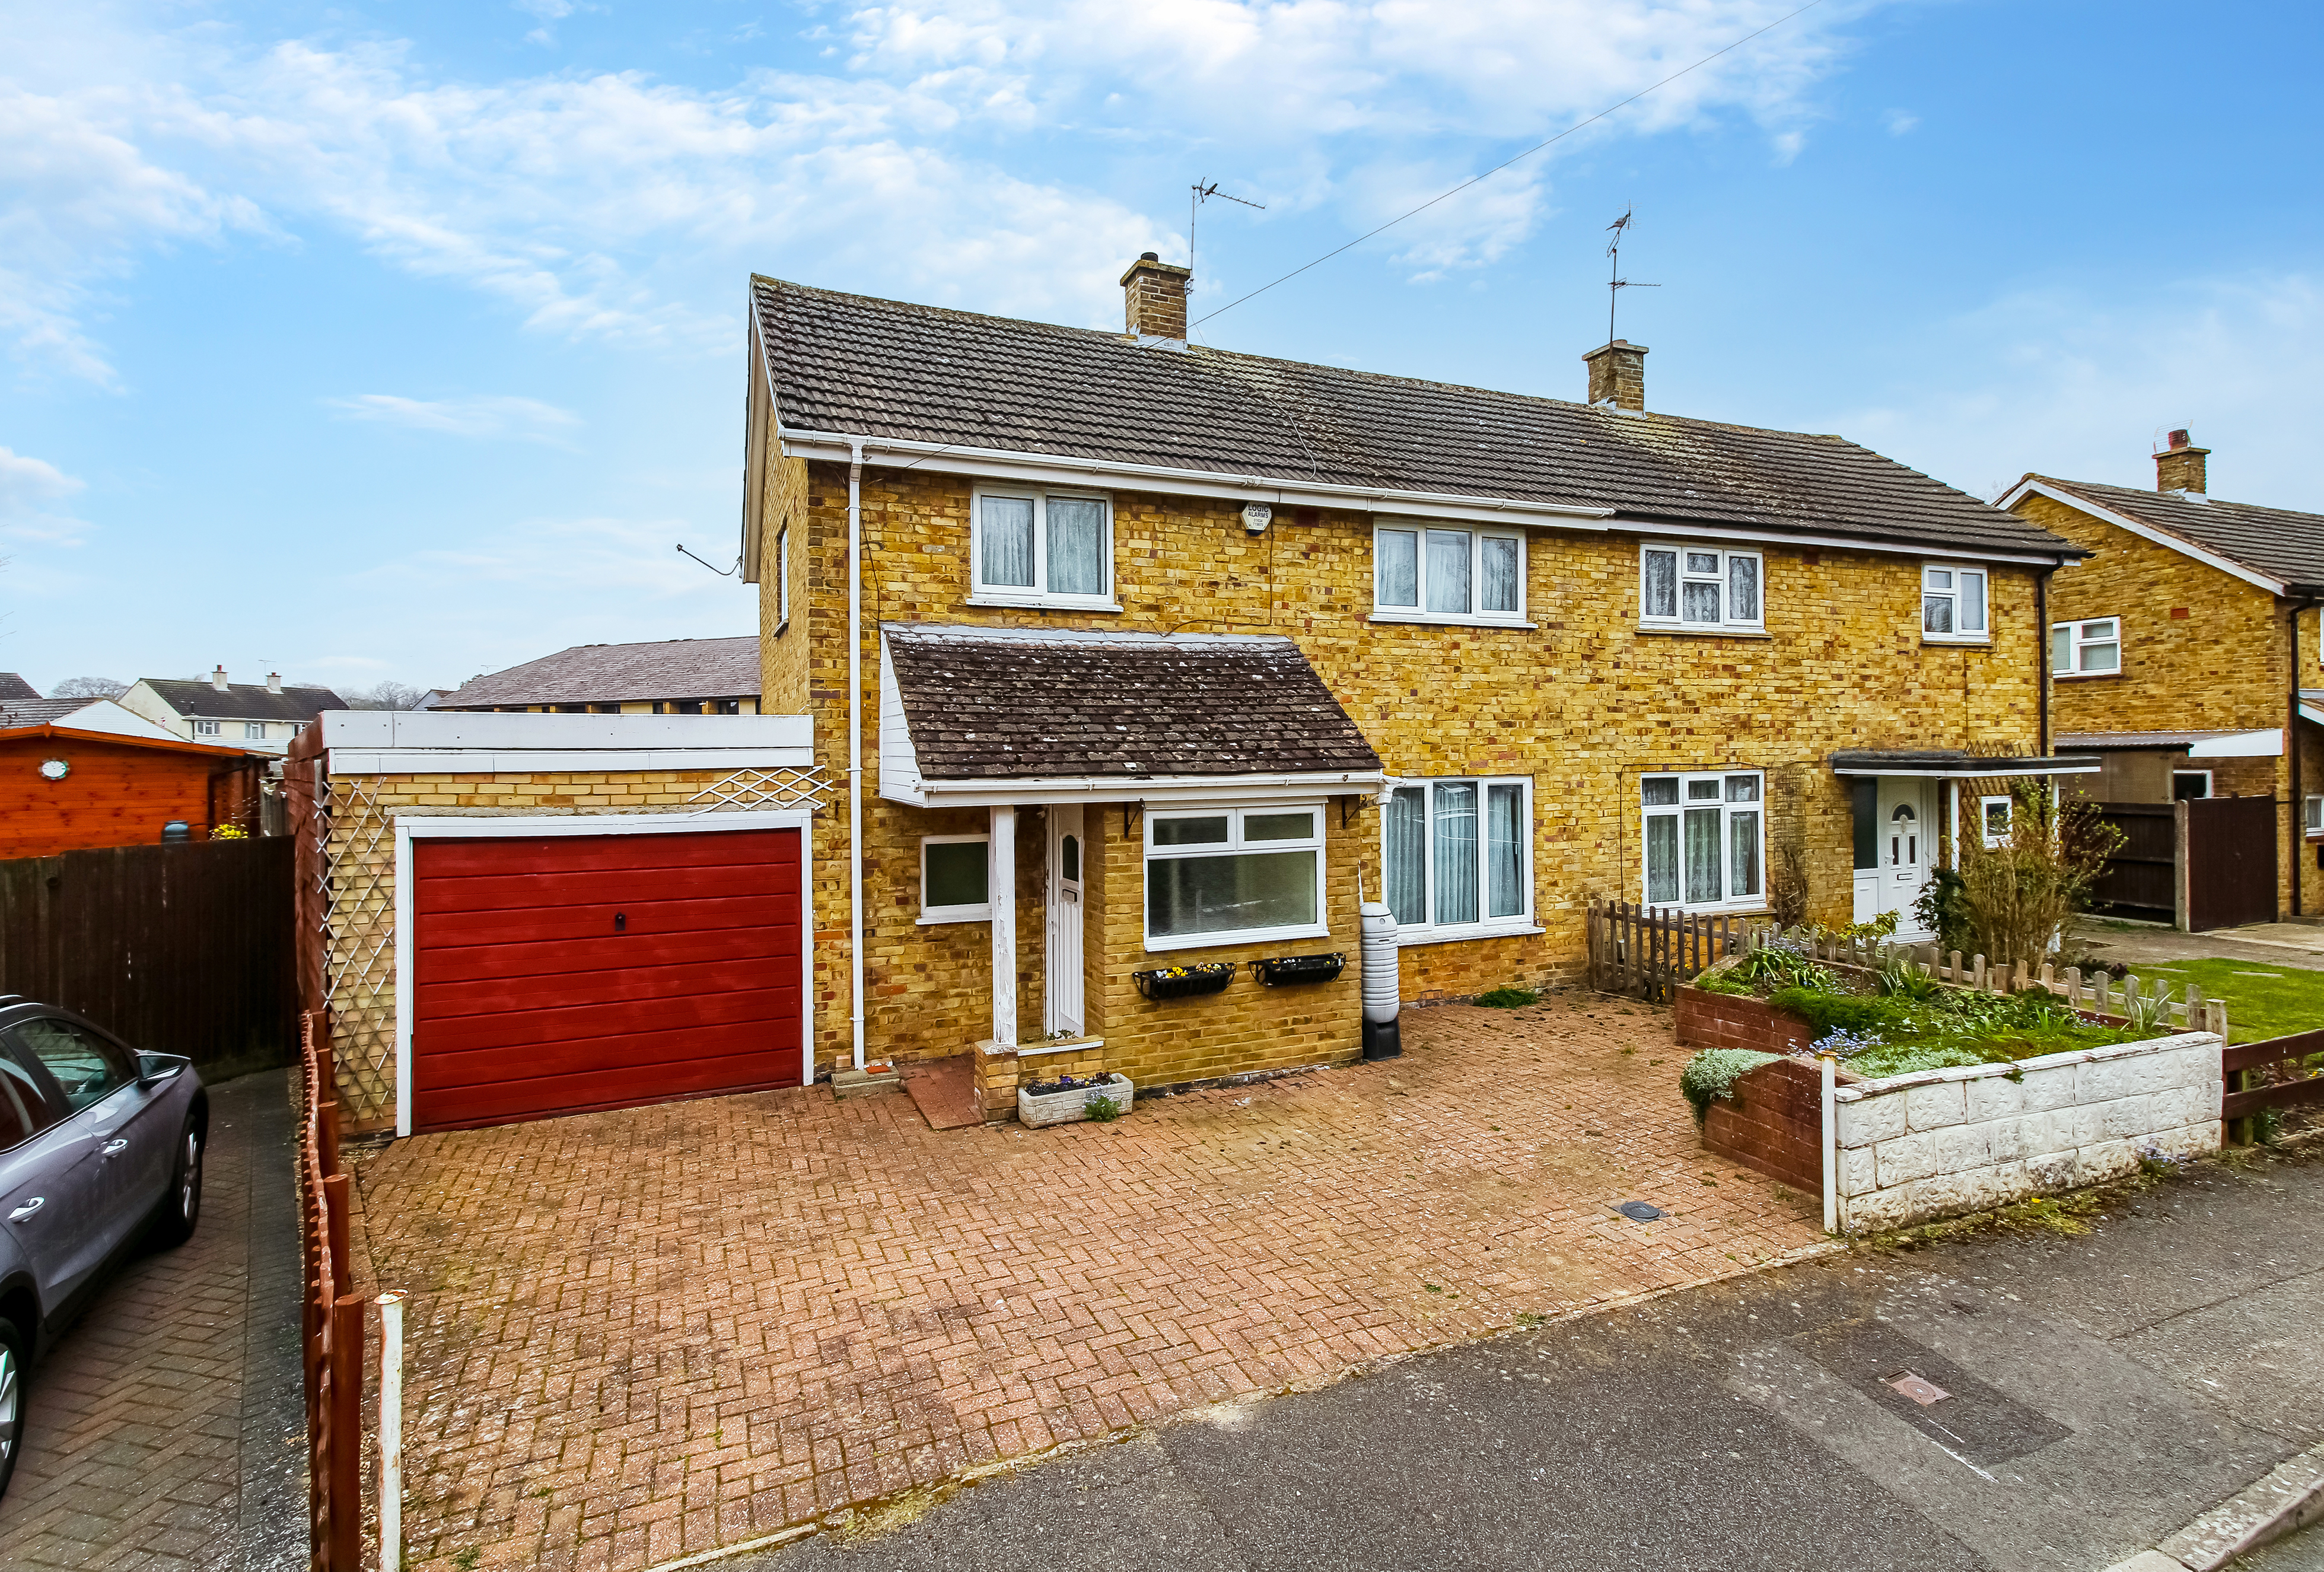 Sold In Your Area; Willington Street, Maidstone